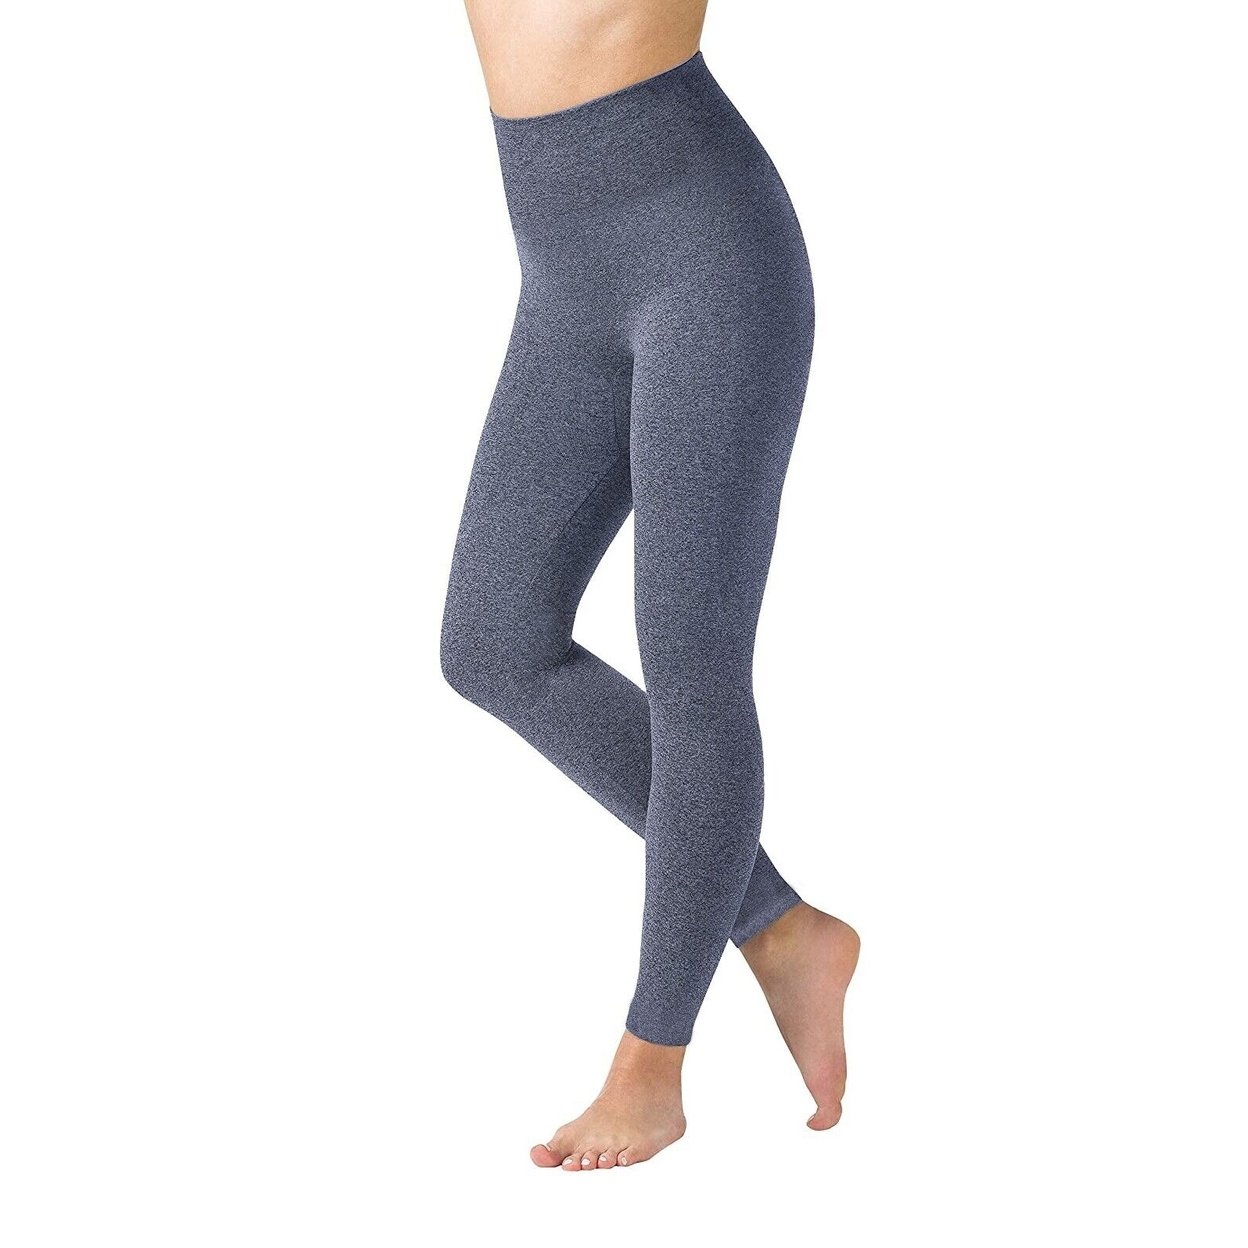 Women's Winter Warm Marled High Waist Fleece Lined Thick Thermal Leggings Pants - Navy, 2x